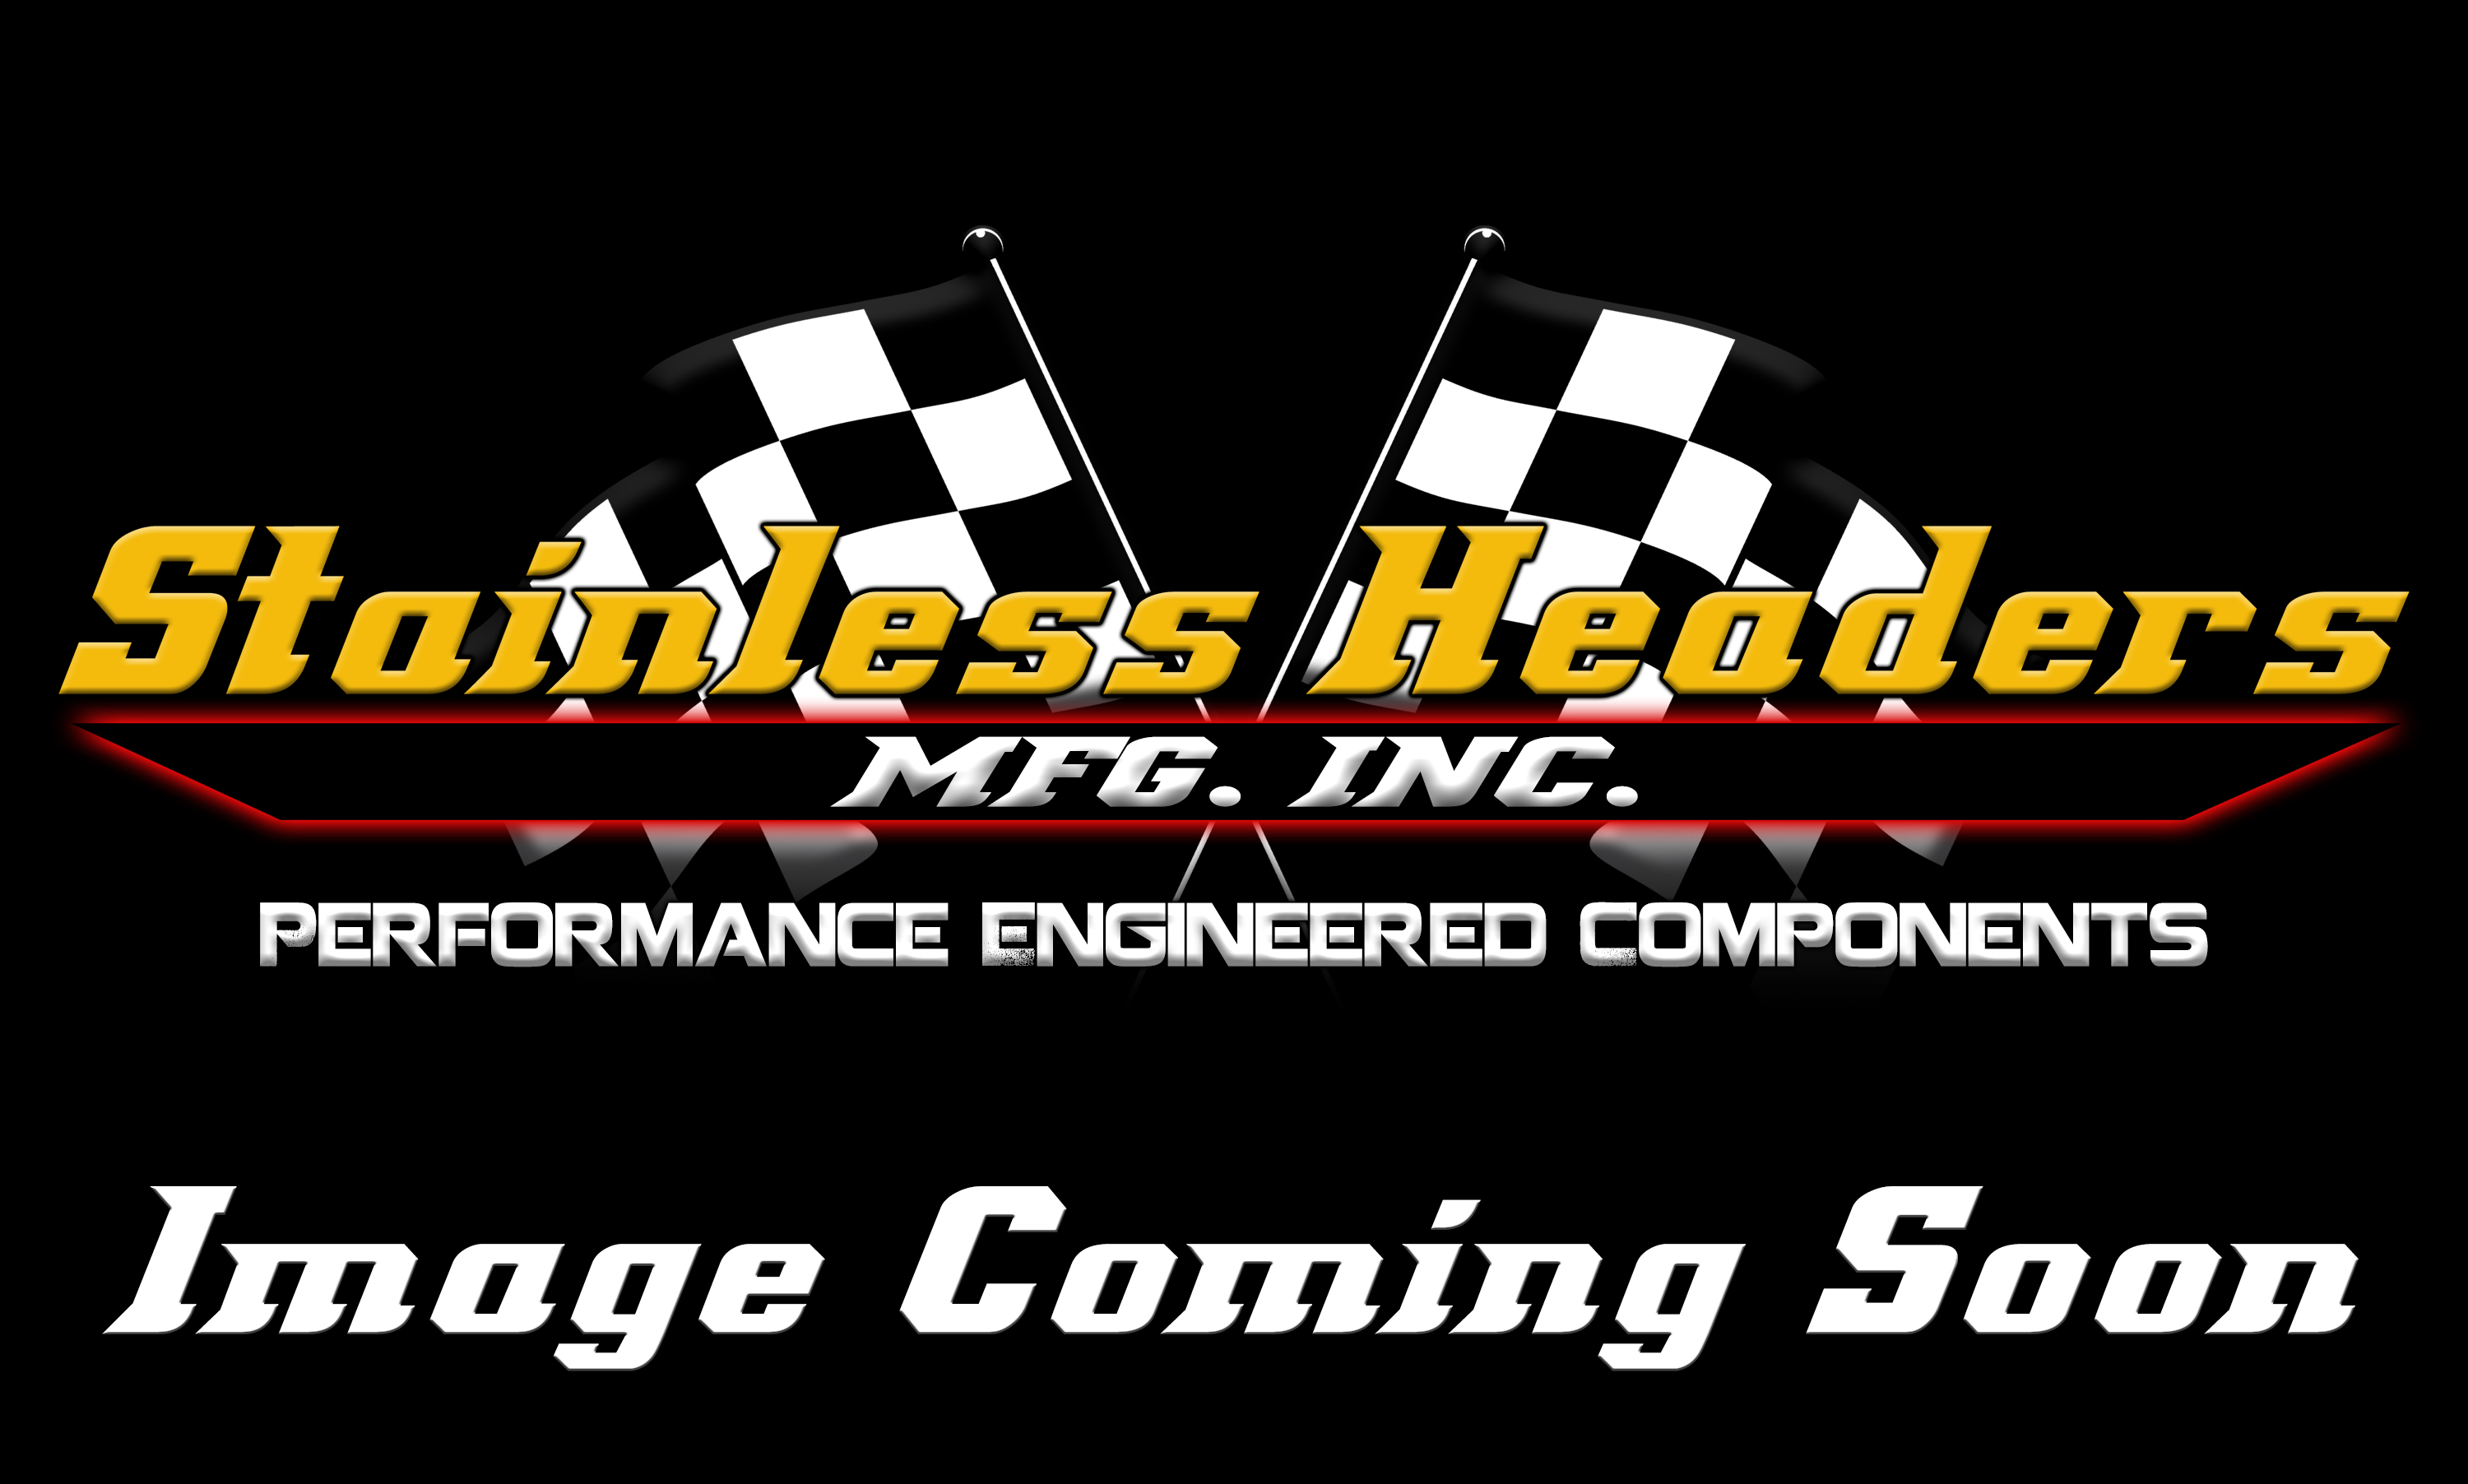 Merge Collectors - 321 Stainless Steel Merge Collectors - Stainless Headers - 1 7/8" Primary 8 into 1 Performance Merge Collector-16ga 321ss